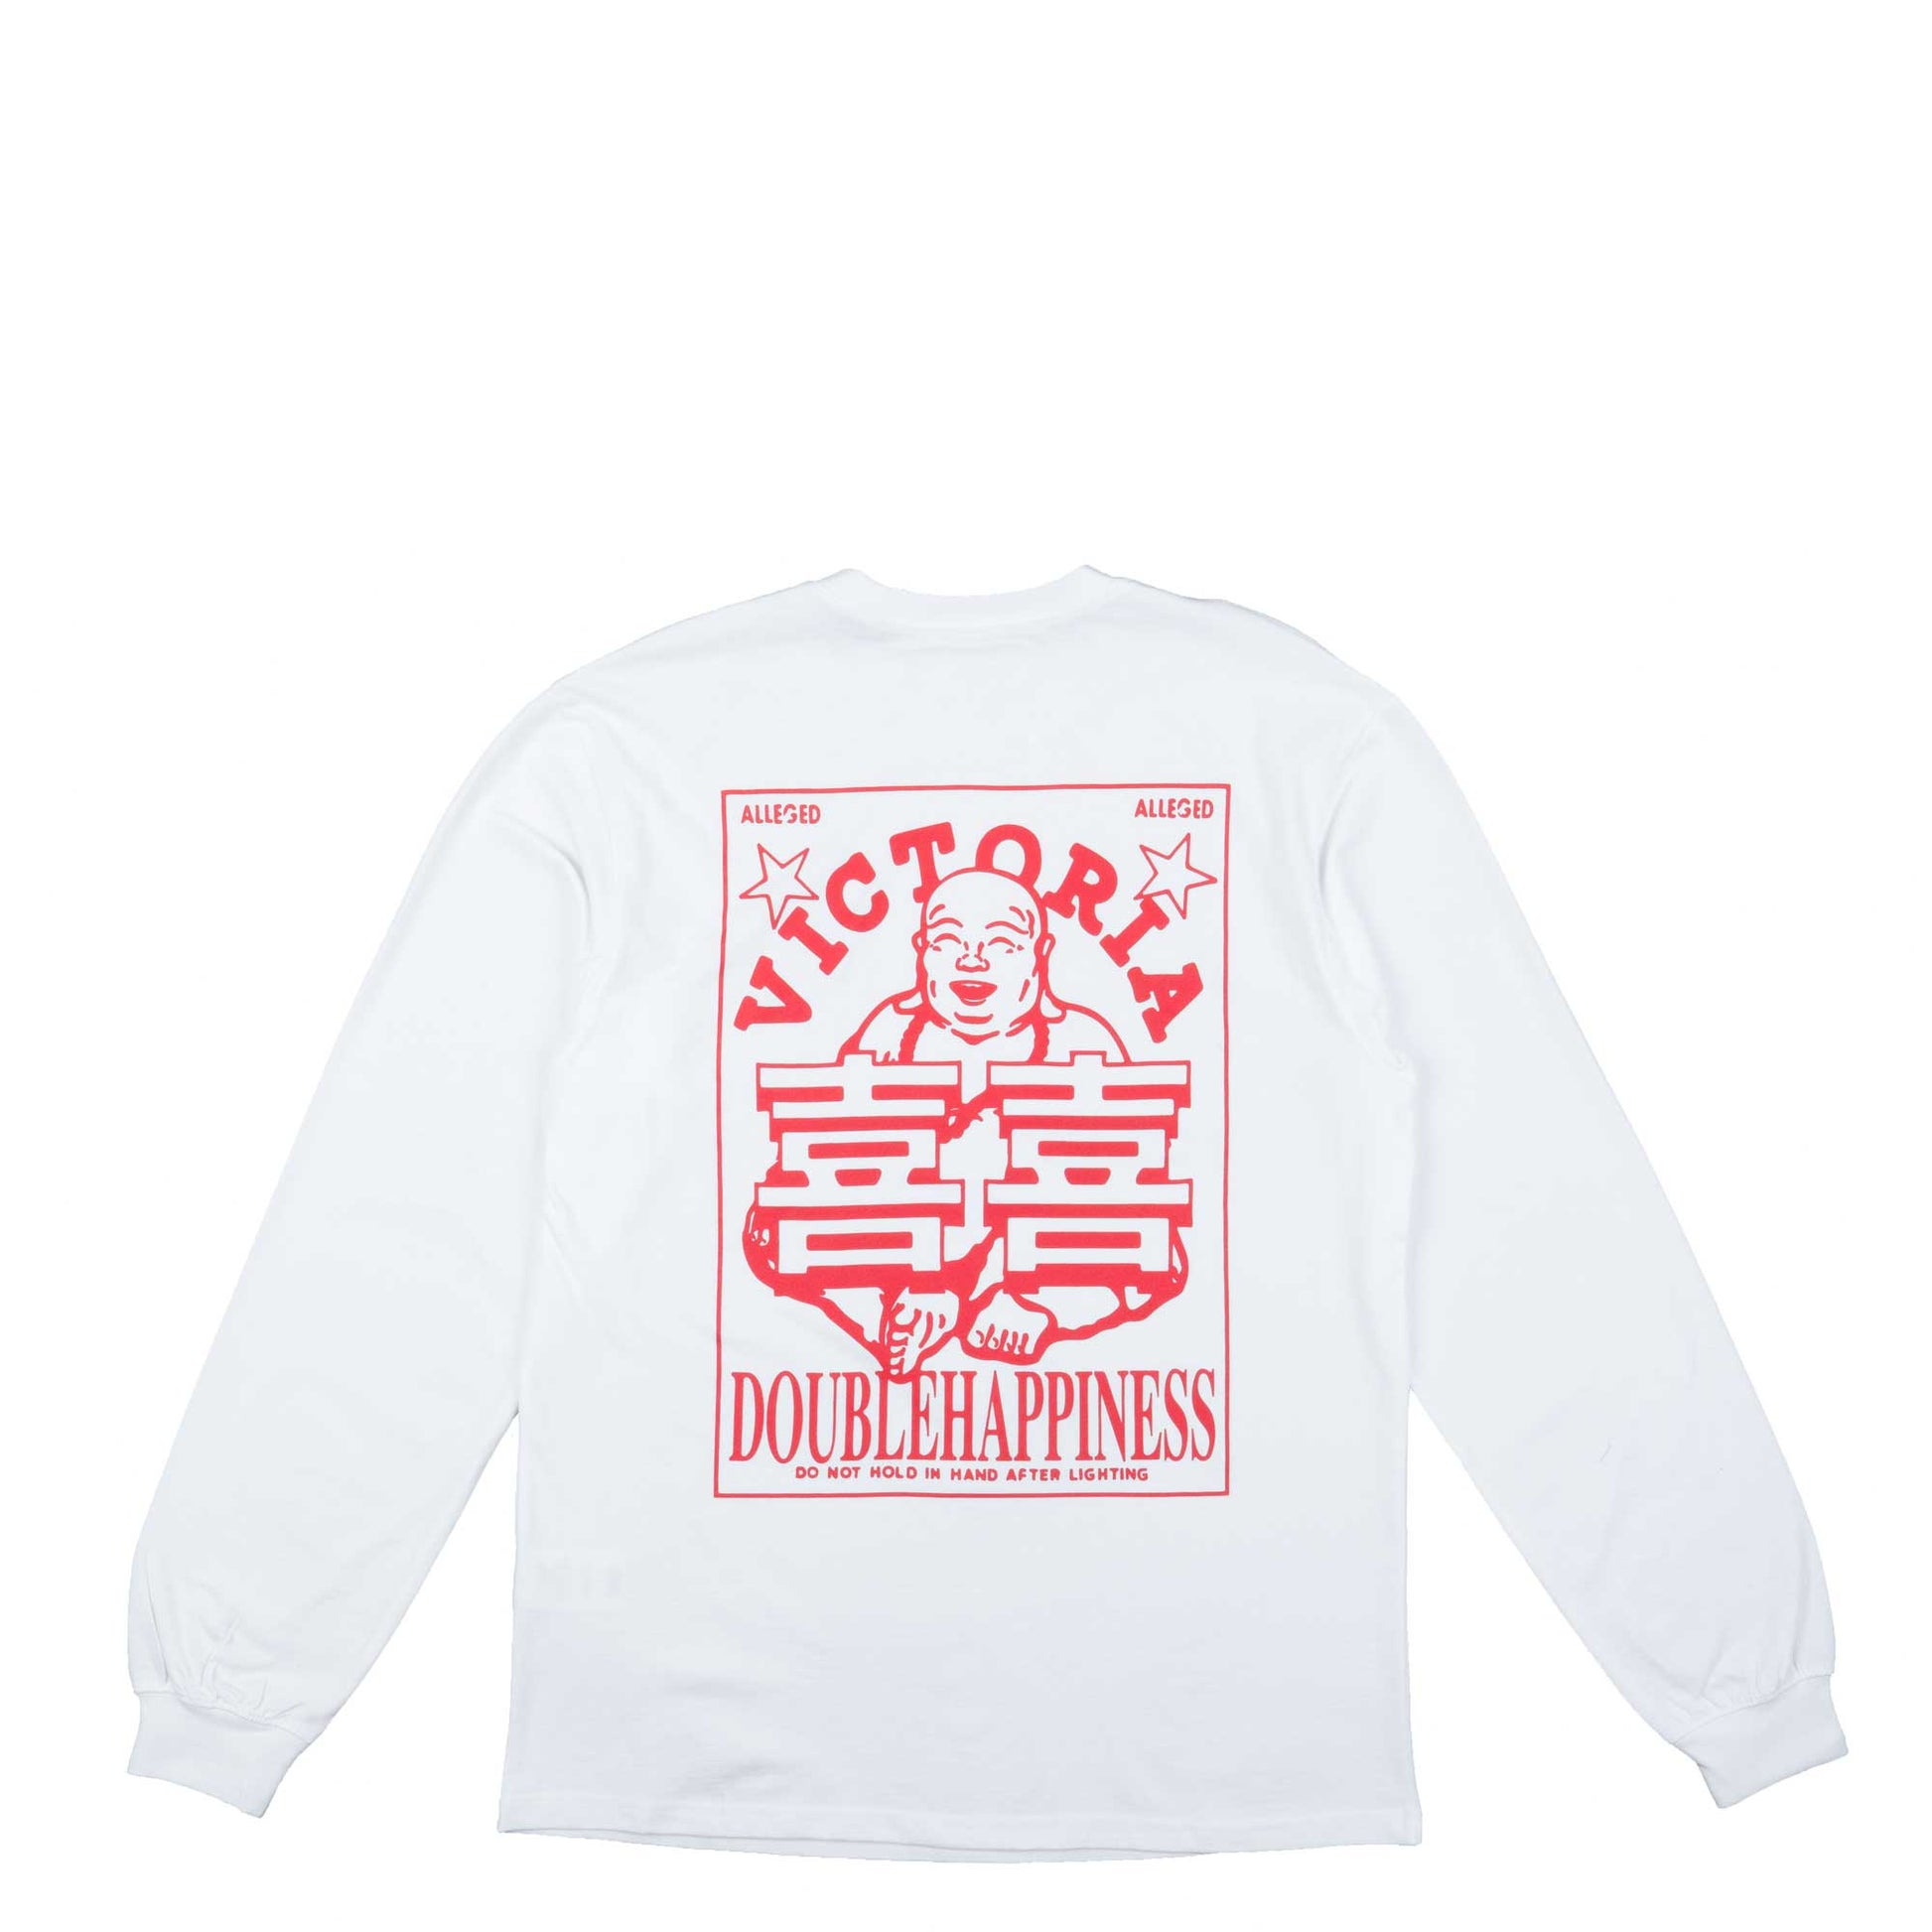 Victoria Double Happiness Ls Tee, white - Tiki Room Skateboards - 2